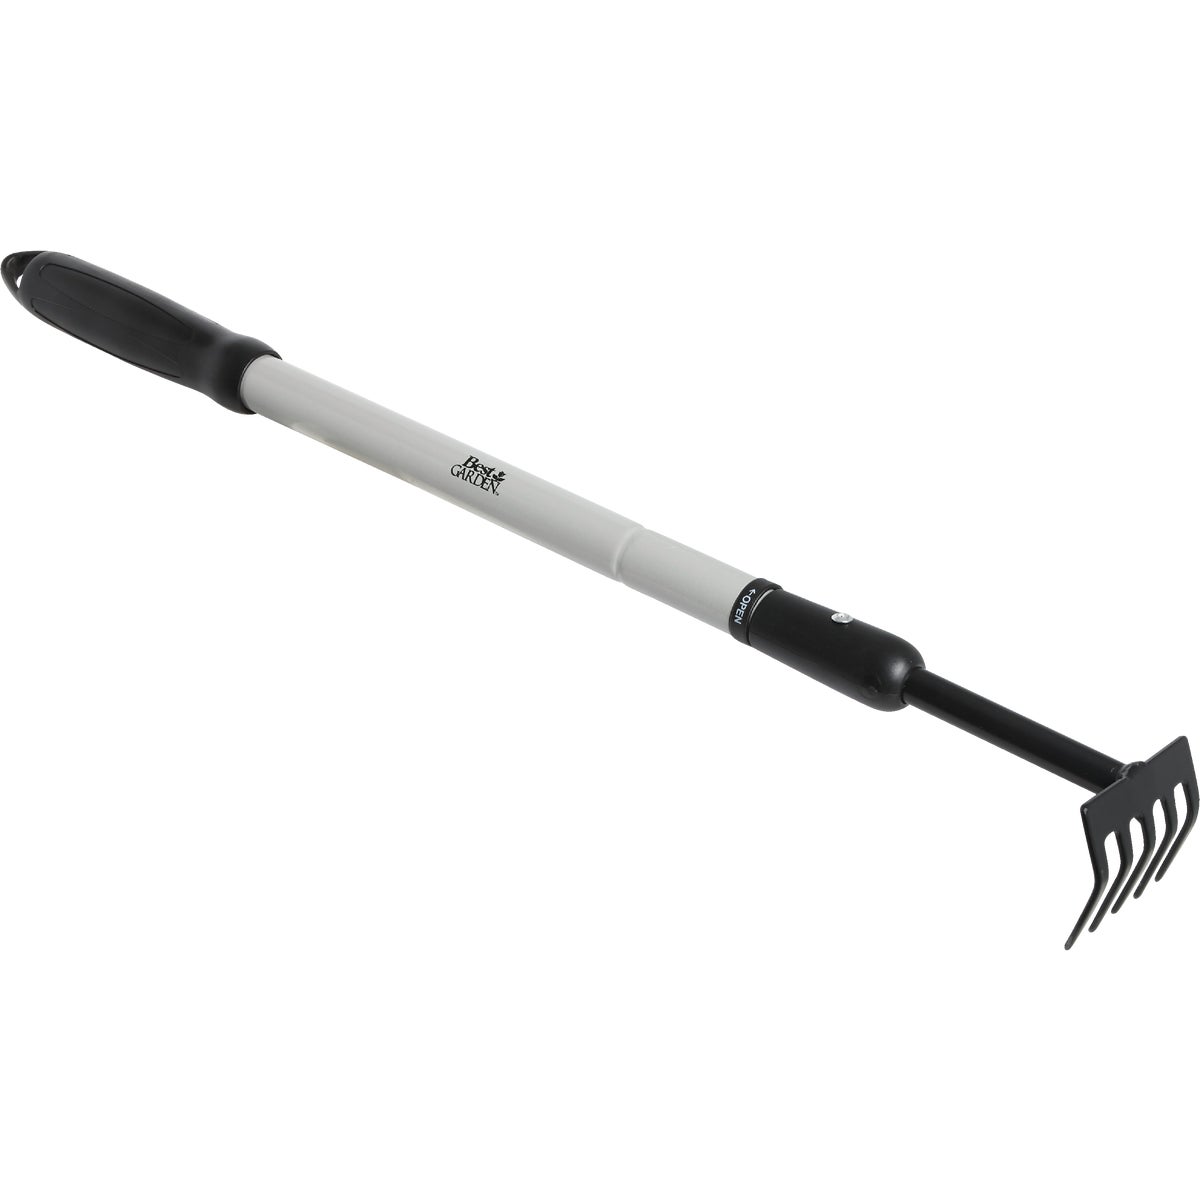 Item 703912, Extendable rake has a lightweight steel handle that extends from 18 In.